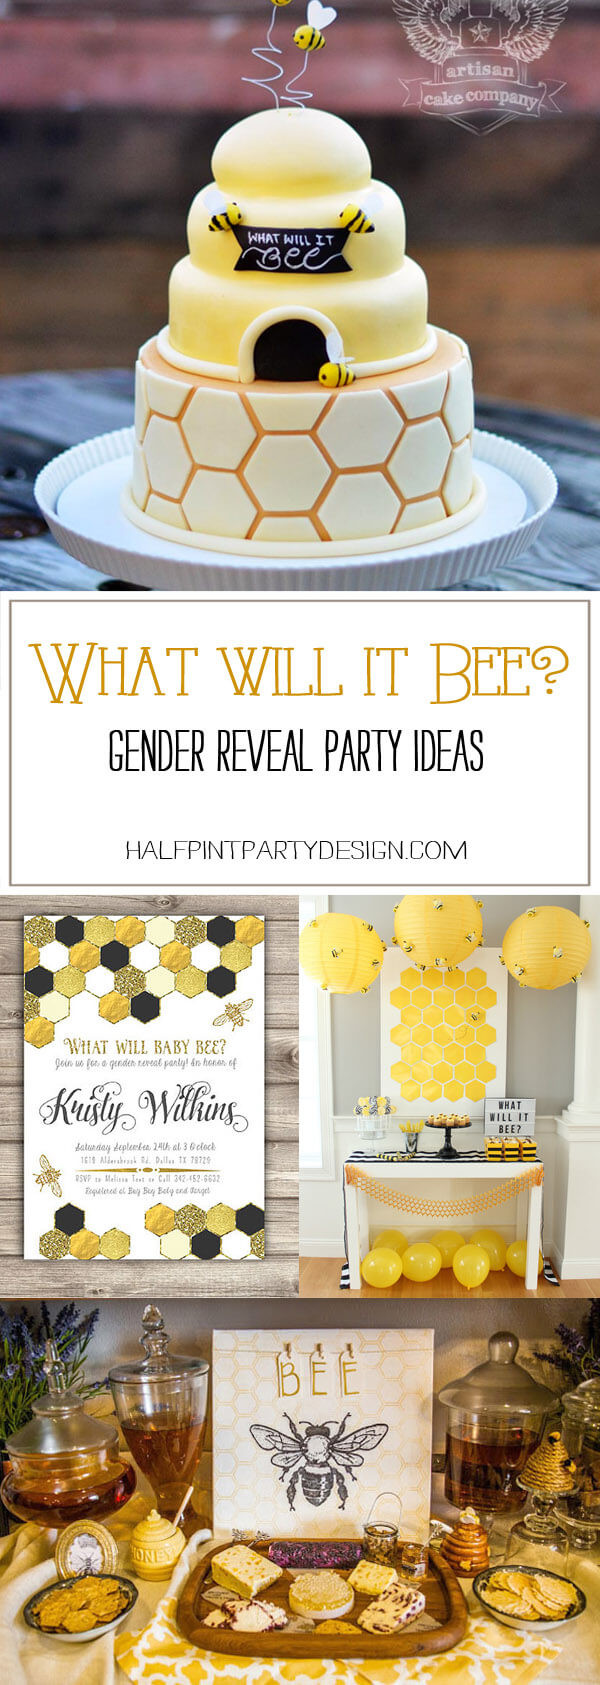 Reveal The Gender Party Ideas
 What Will it Bee Gender Reveal Party Ideas Parties With